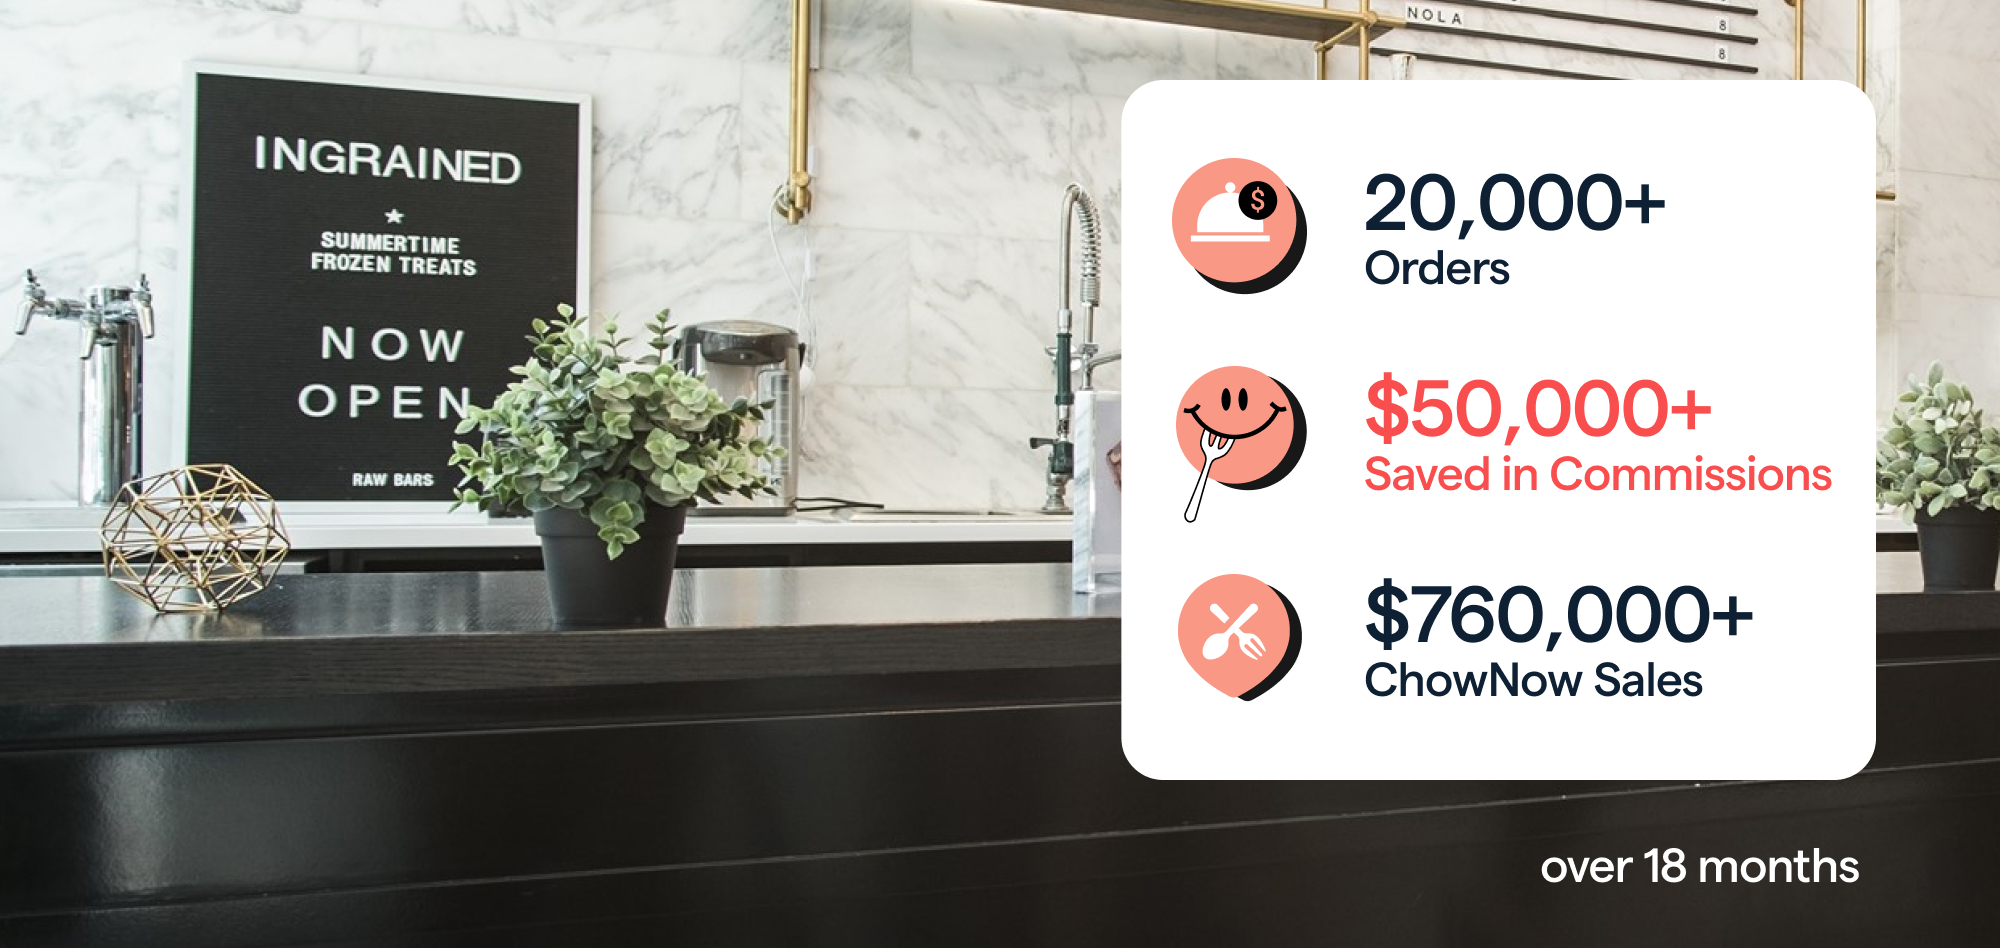 By partnering with ChowNow, ingrained has served 20k orders and saved 50k in commissions.